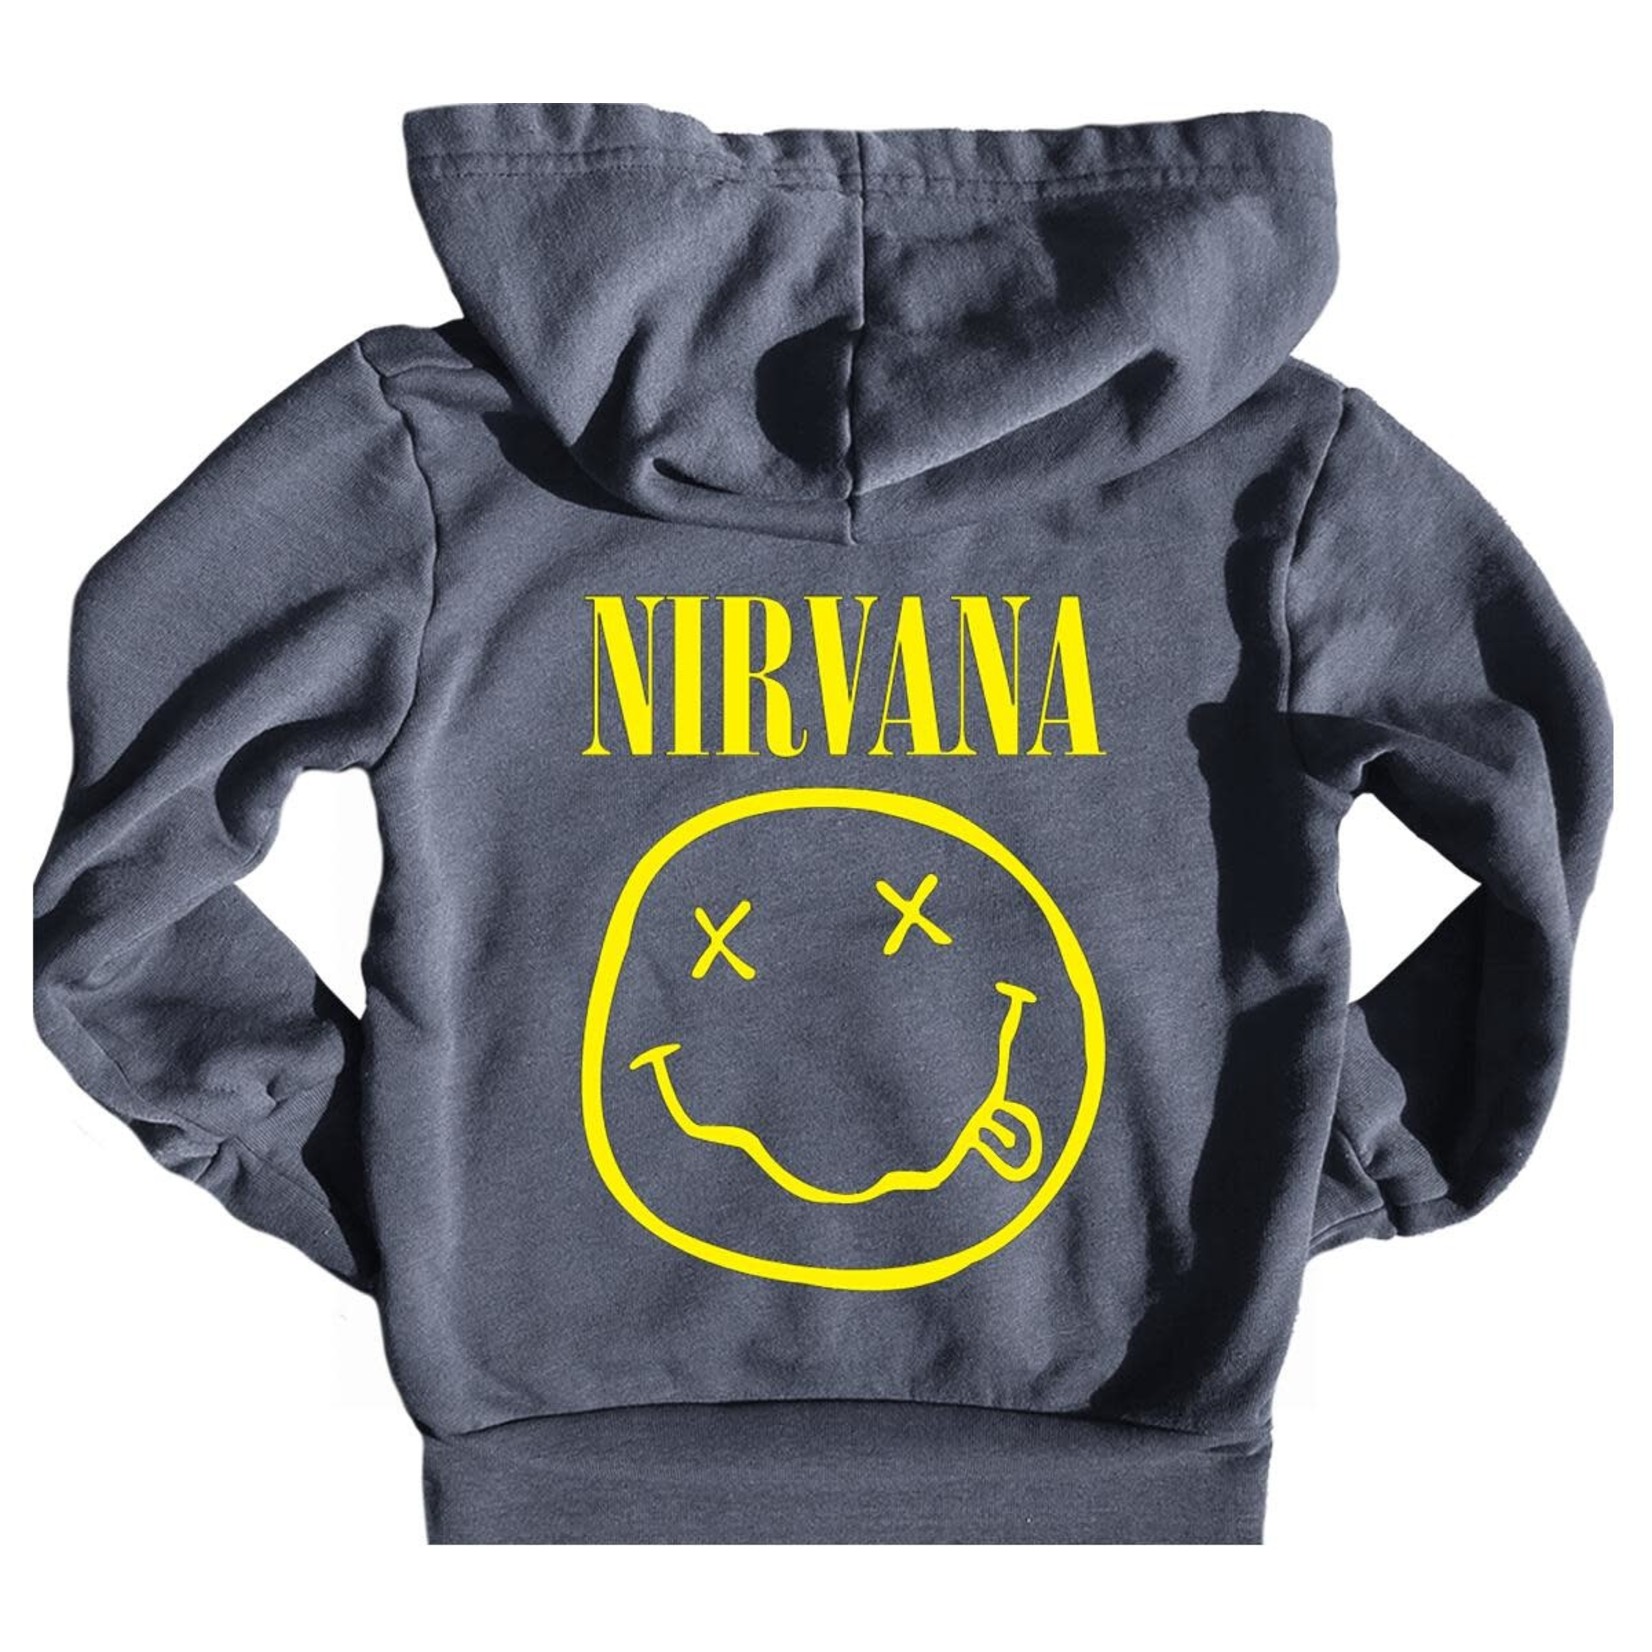 Rowdy Spout Rowdy Sprout Off Black Nirvana Hoodie